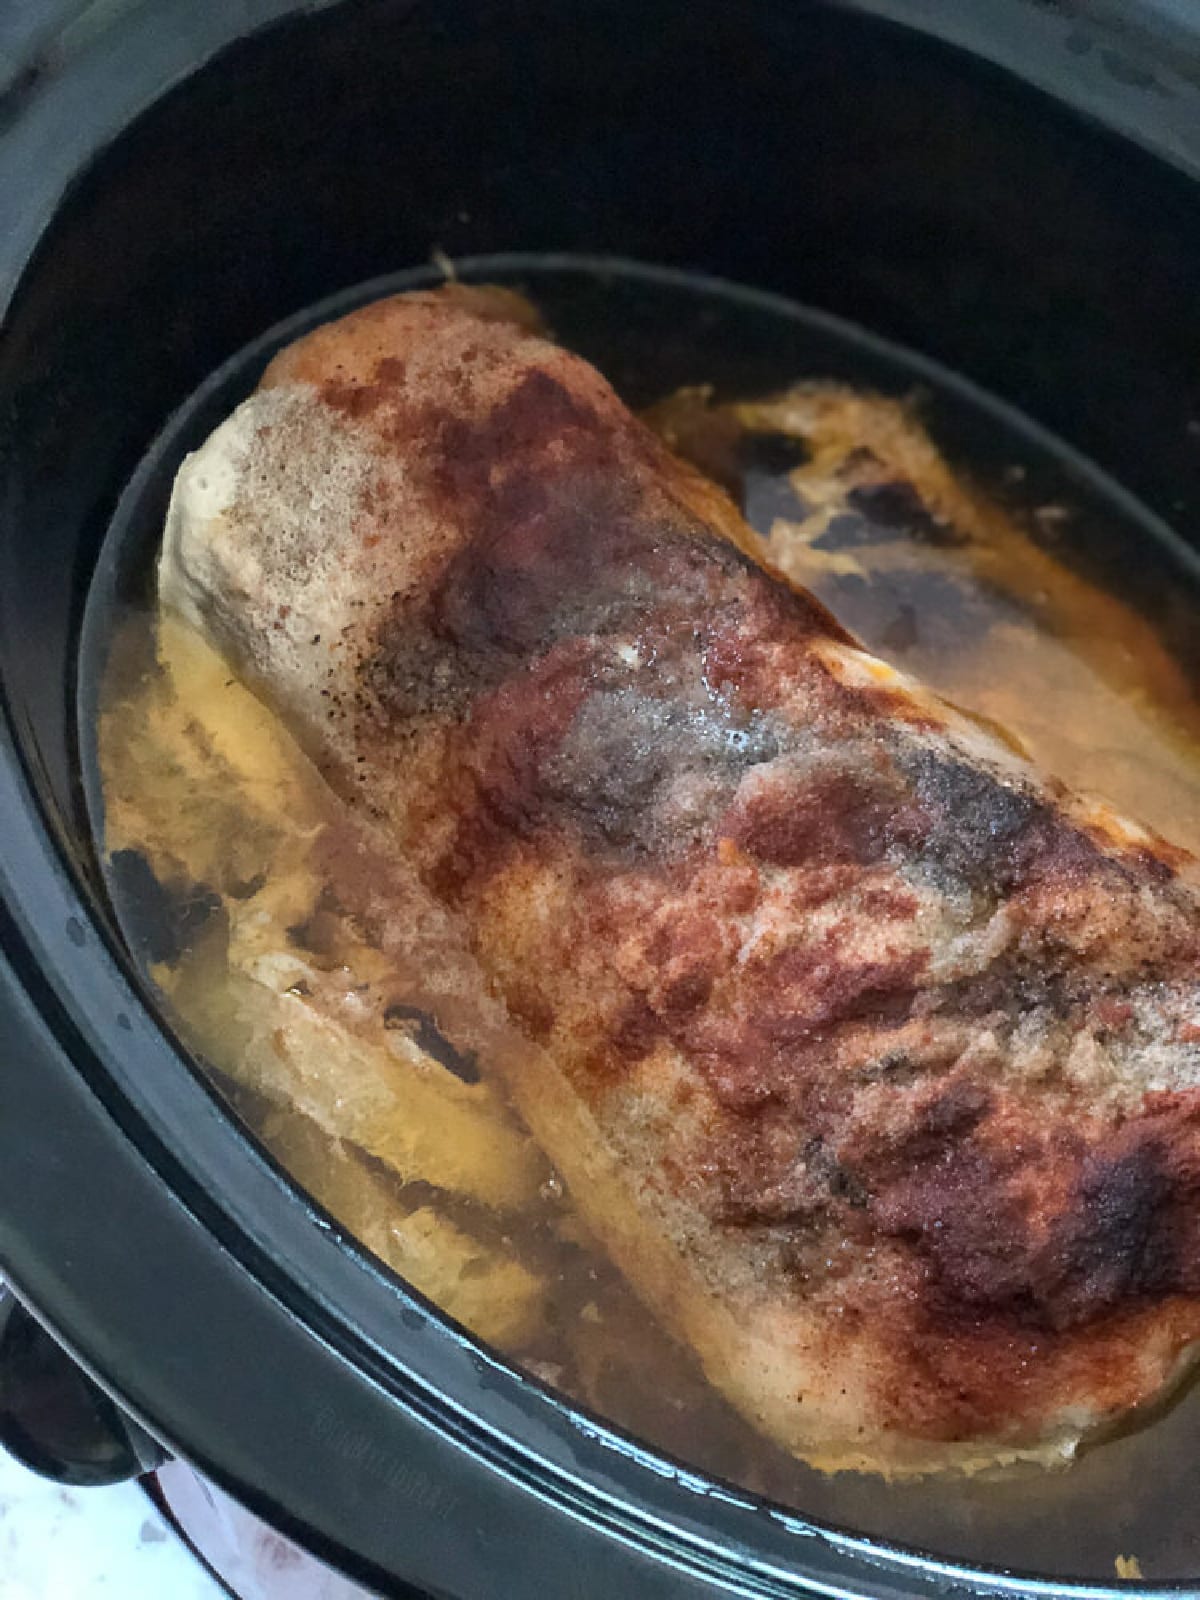 A piece of meat is being cooked in a slow cooker.